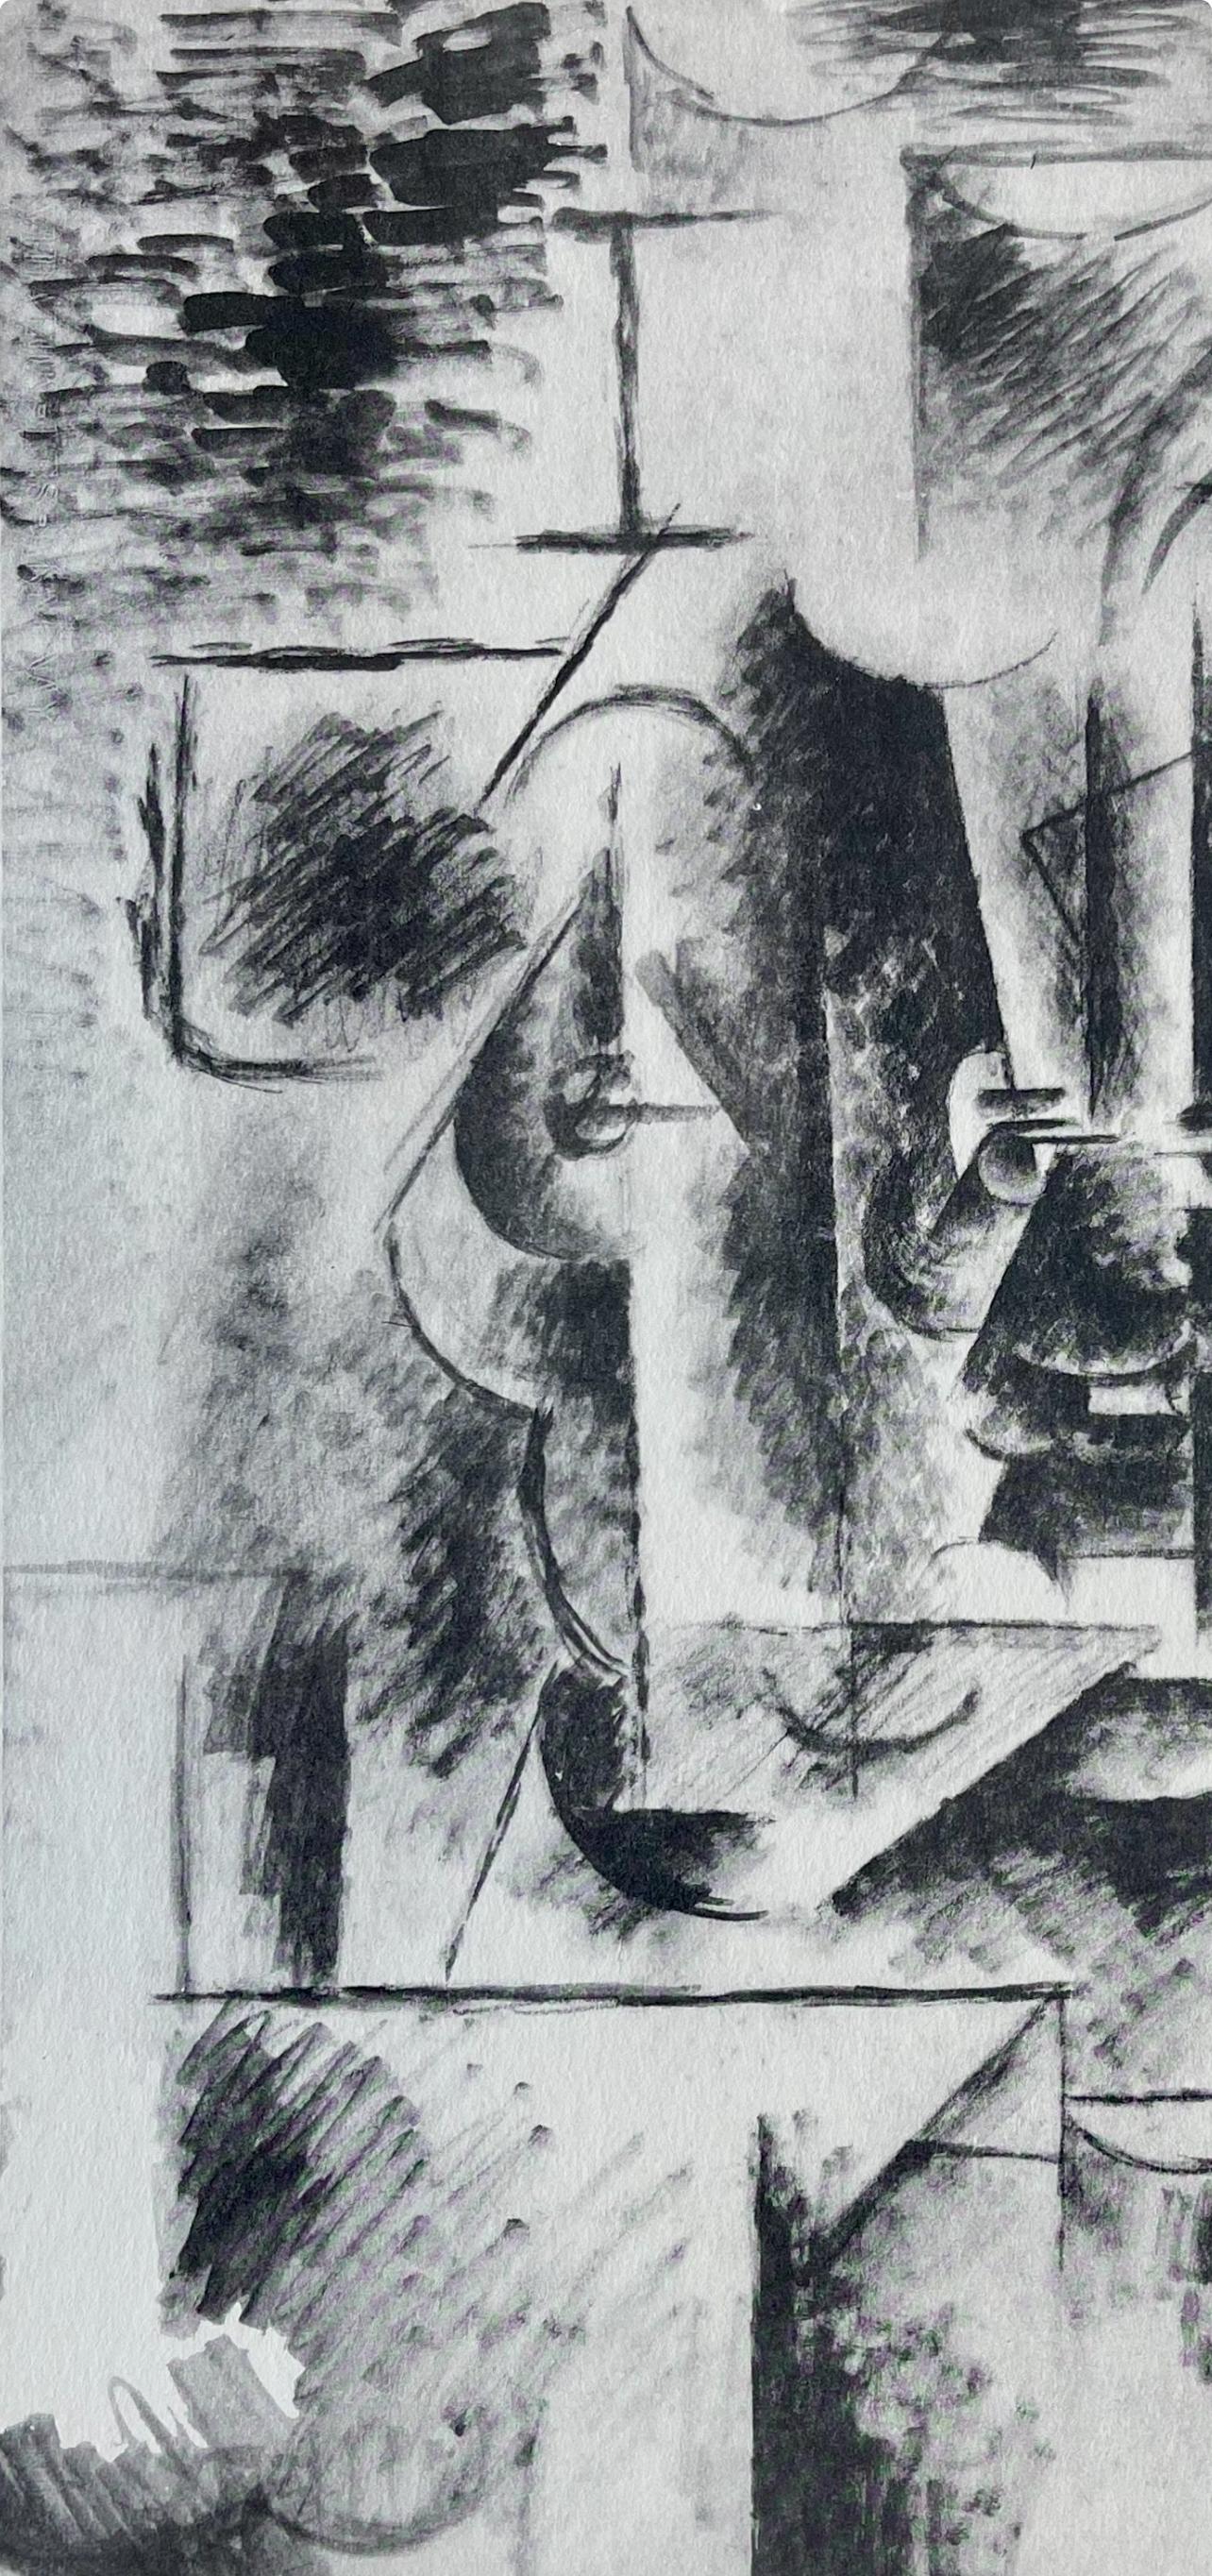 Picasso, Man with Pipe, Picasso: Fifteen Drawings (after) - Modern Print by Pablo Picasso